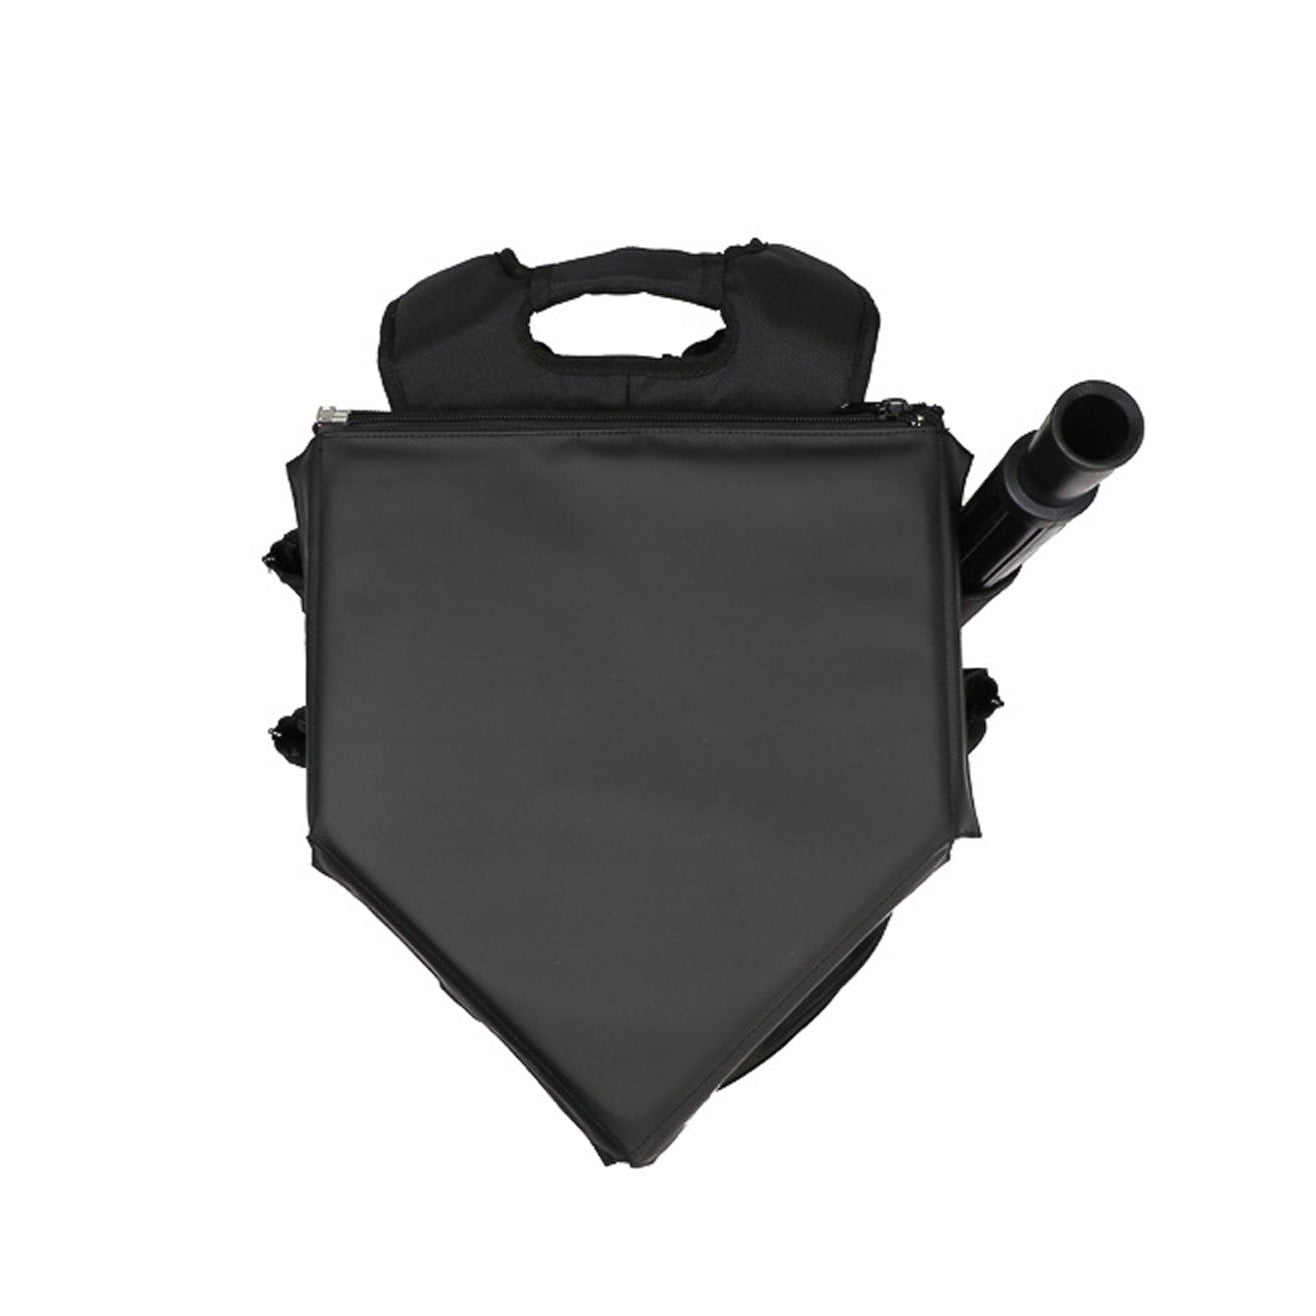 VeloTee Baseball & Softball Bat Bag Backpack with Batting Tee is shaped like a home plate. The home plate top is customizable and removable giving players and coaches a home plate to use wherever they travel. 